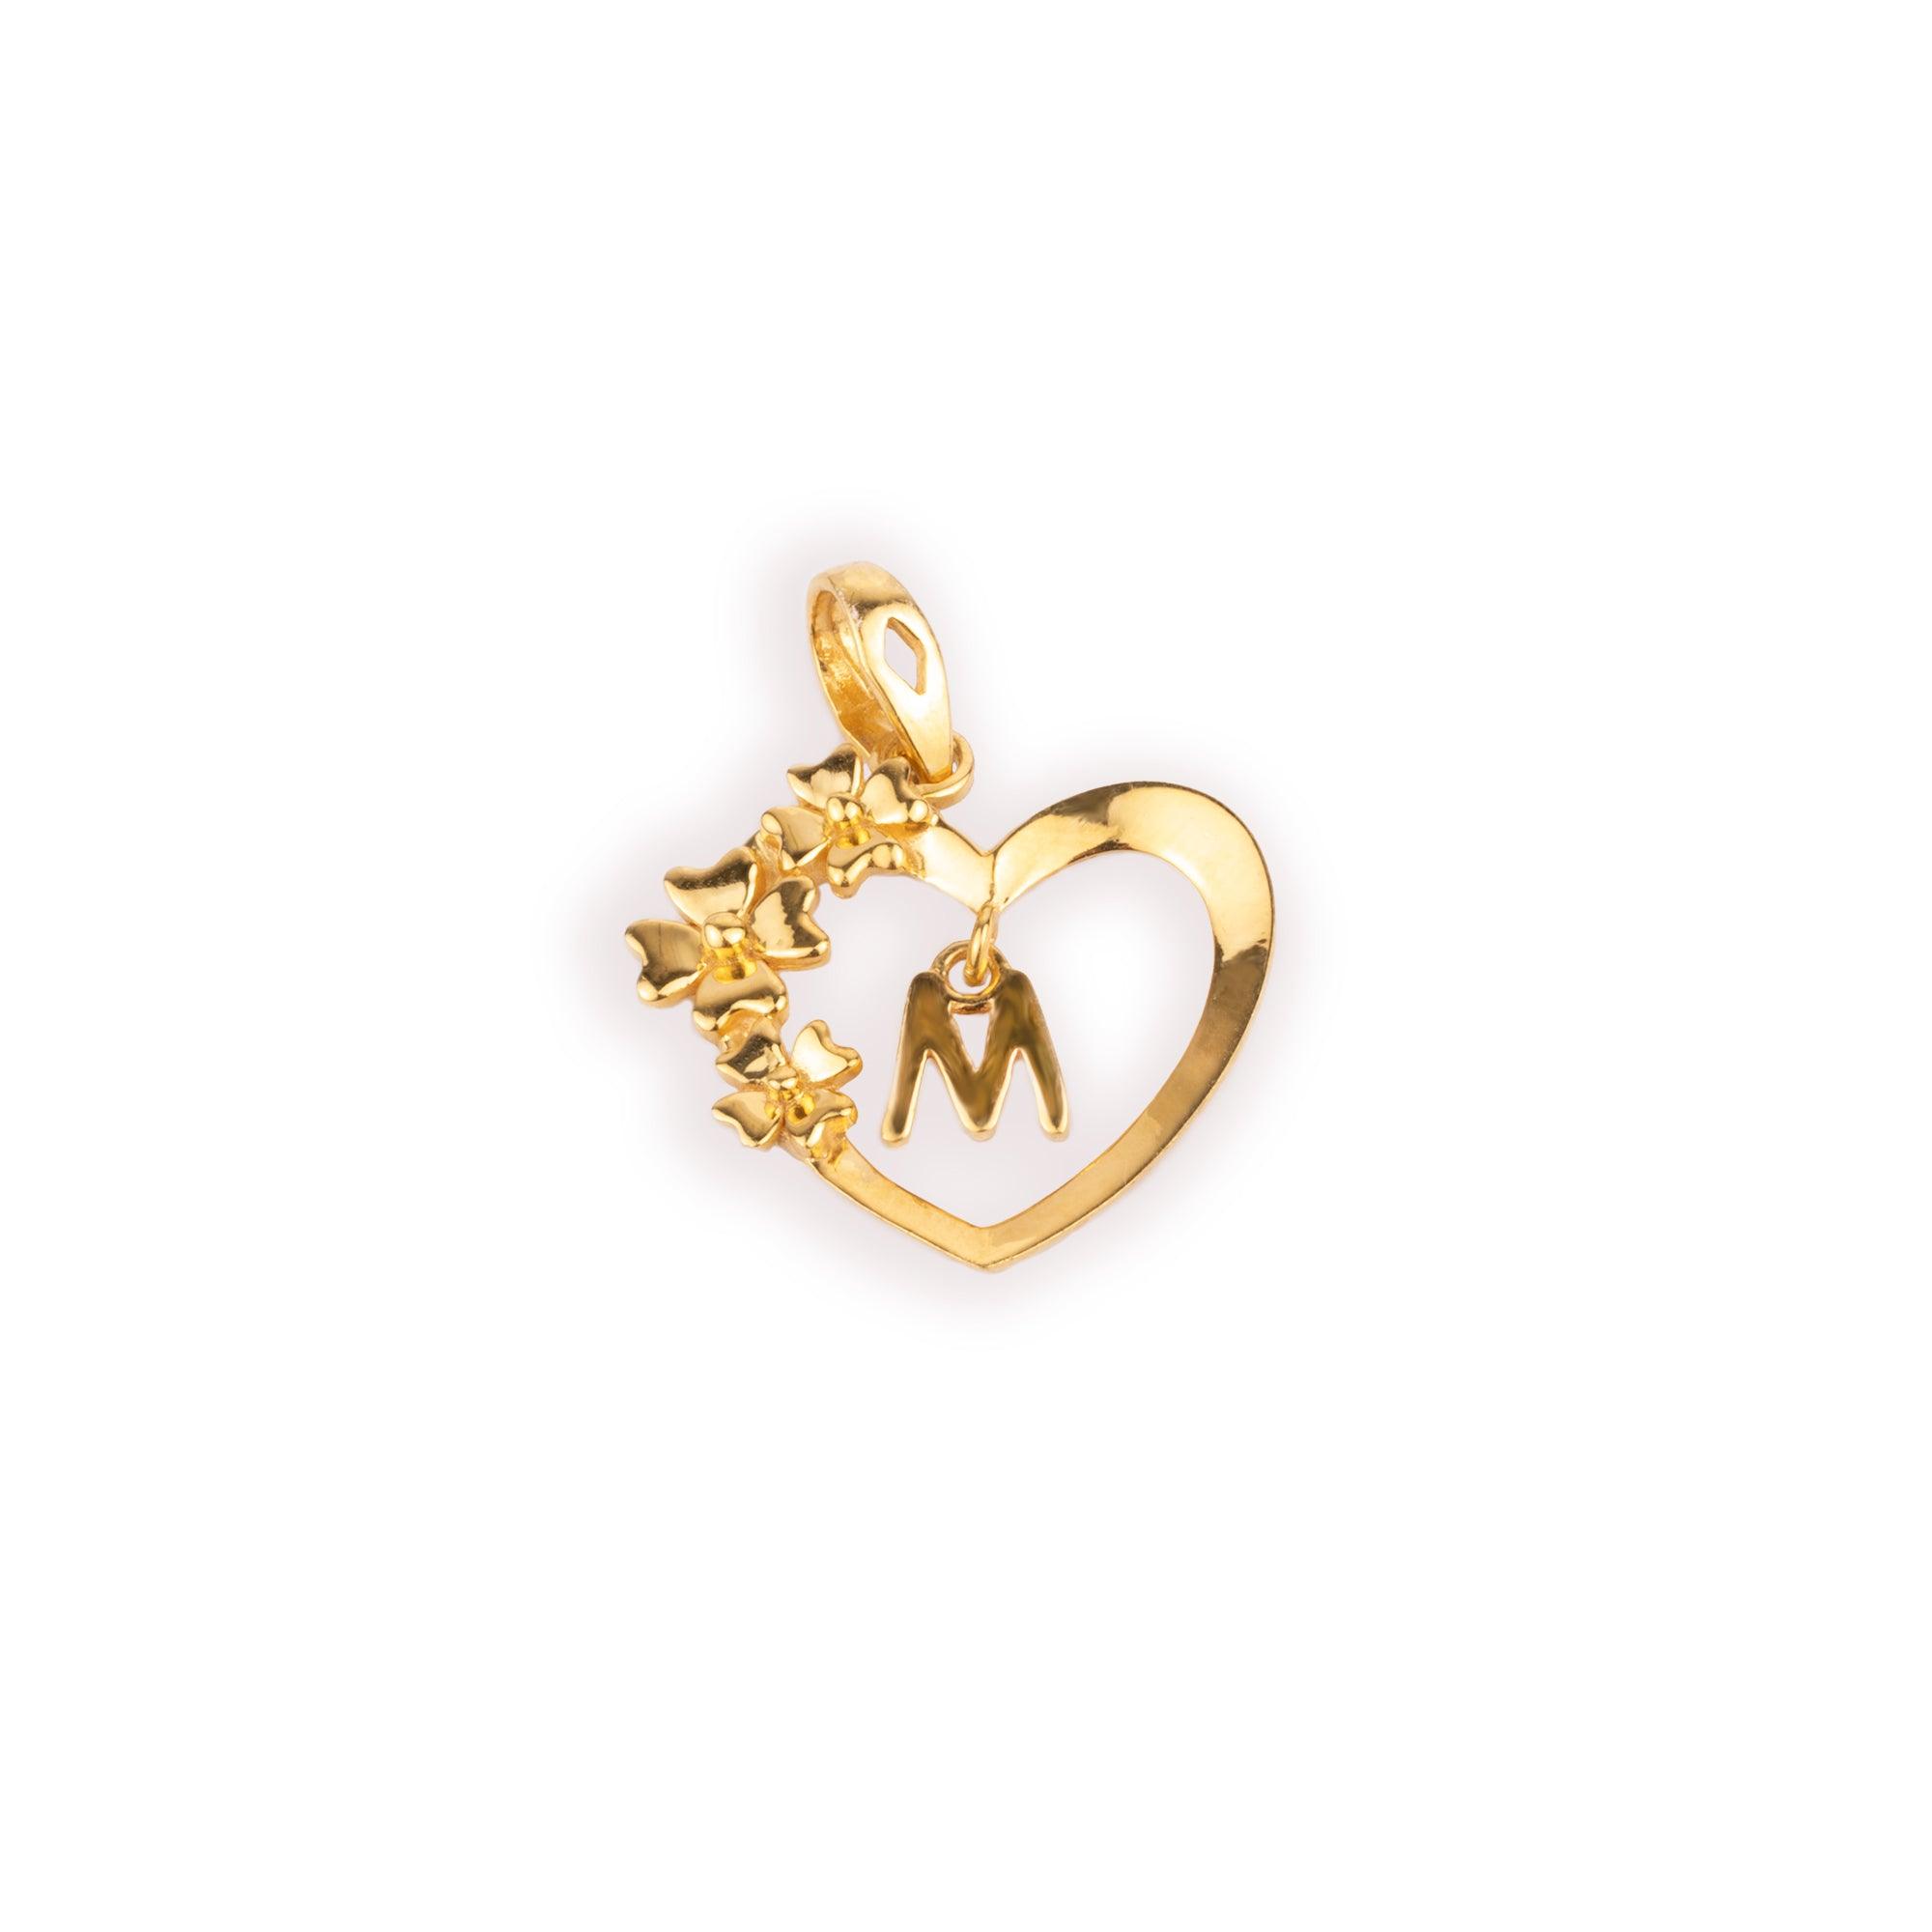 'M' 22ct Gold Heart Shape Initial Pendant with Flower Design P-7035-M - Minar Jewellers